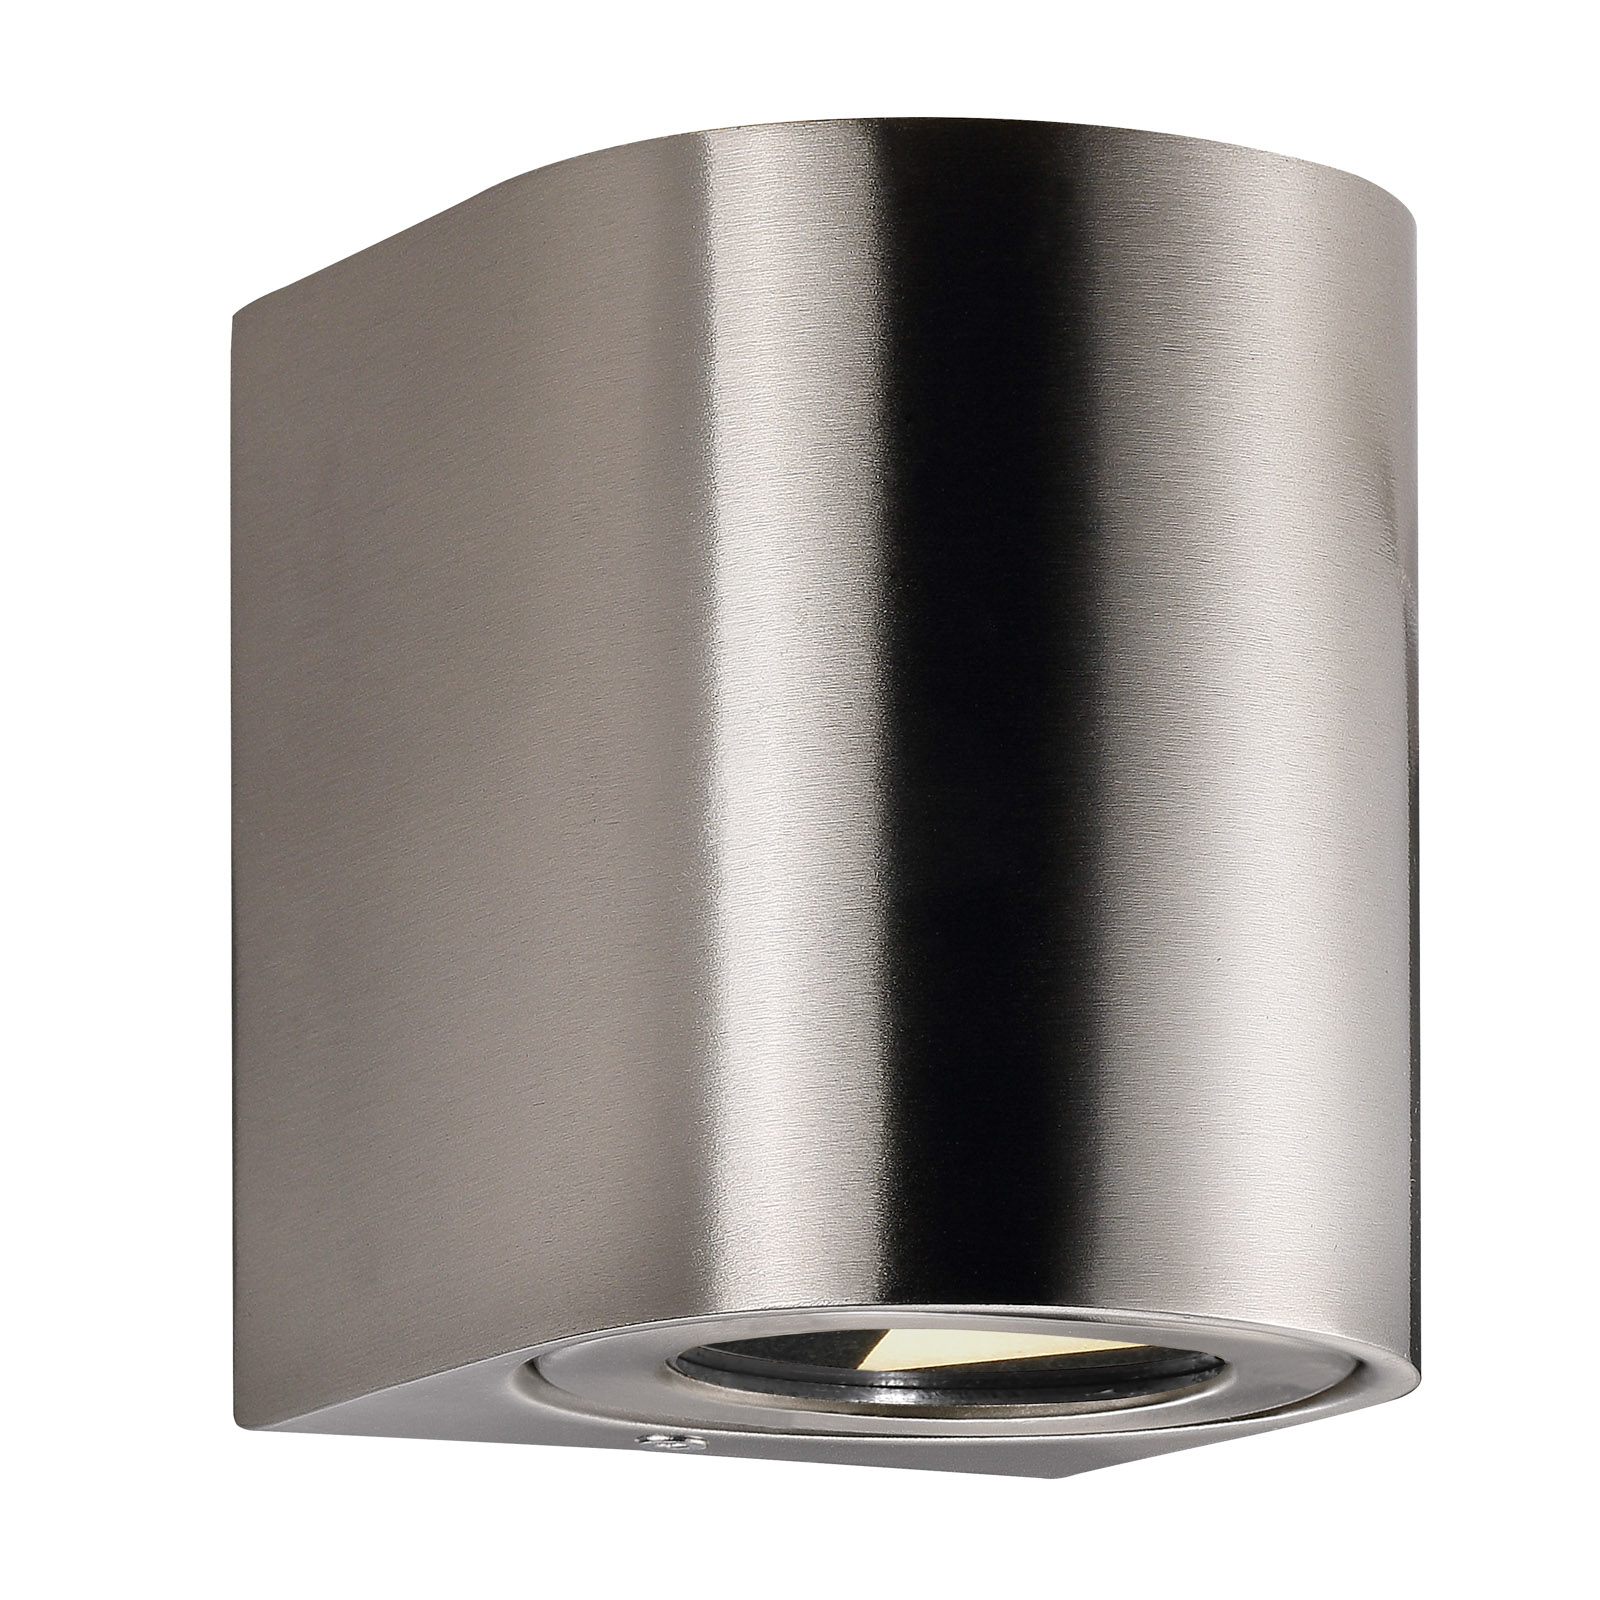 Canto 2 LED outdoor wall light, stainless steel